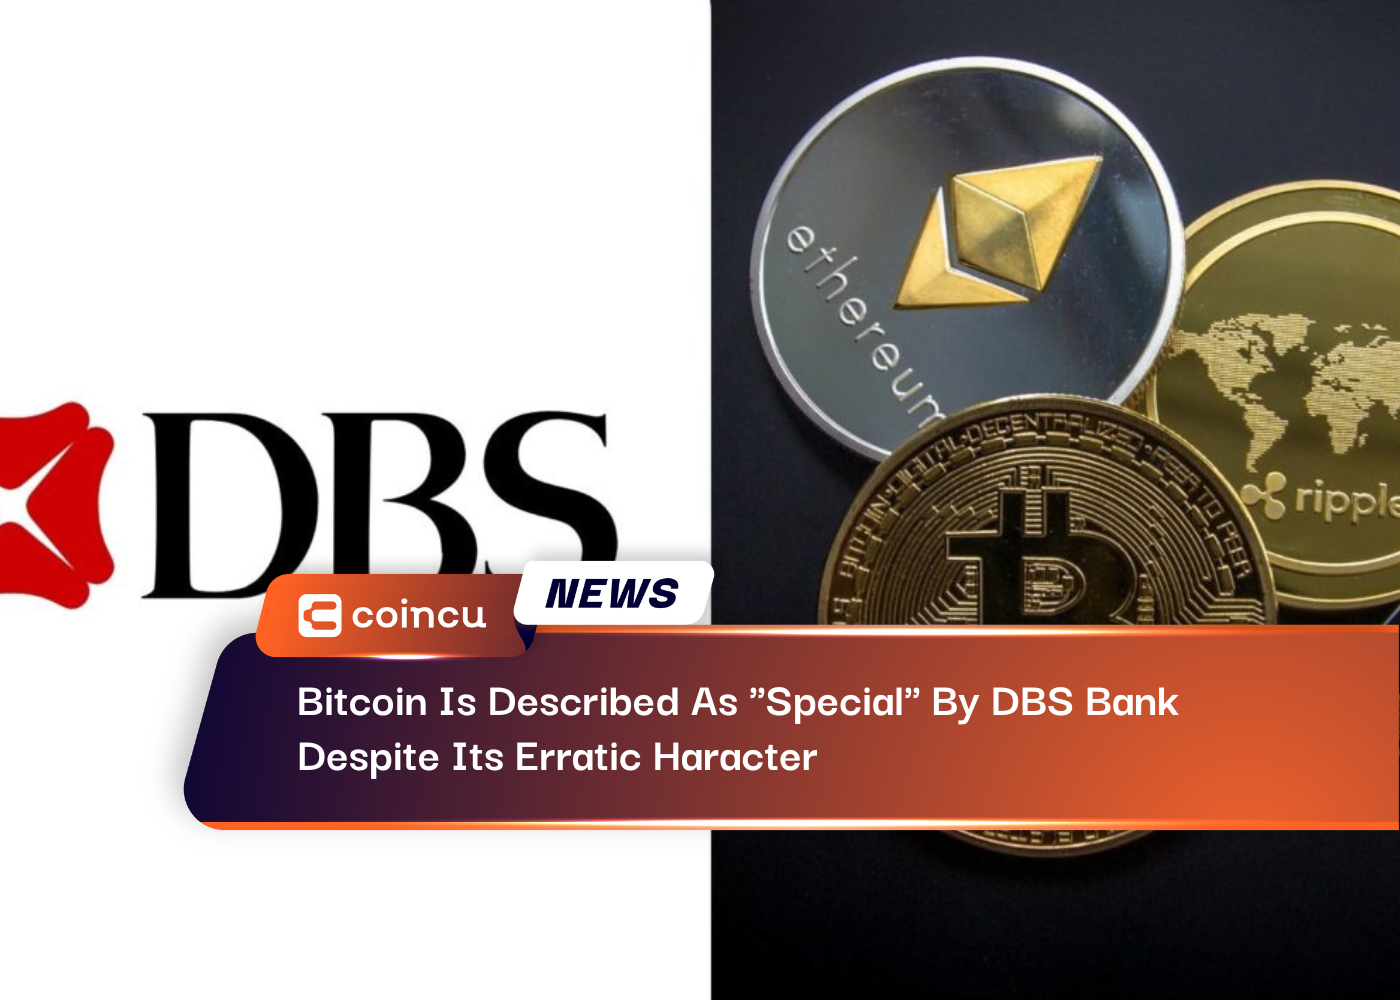 Bitcoin Is Described As Special By DBS Bank